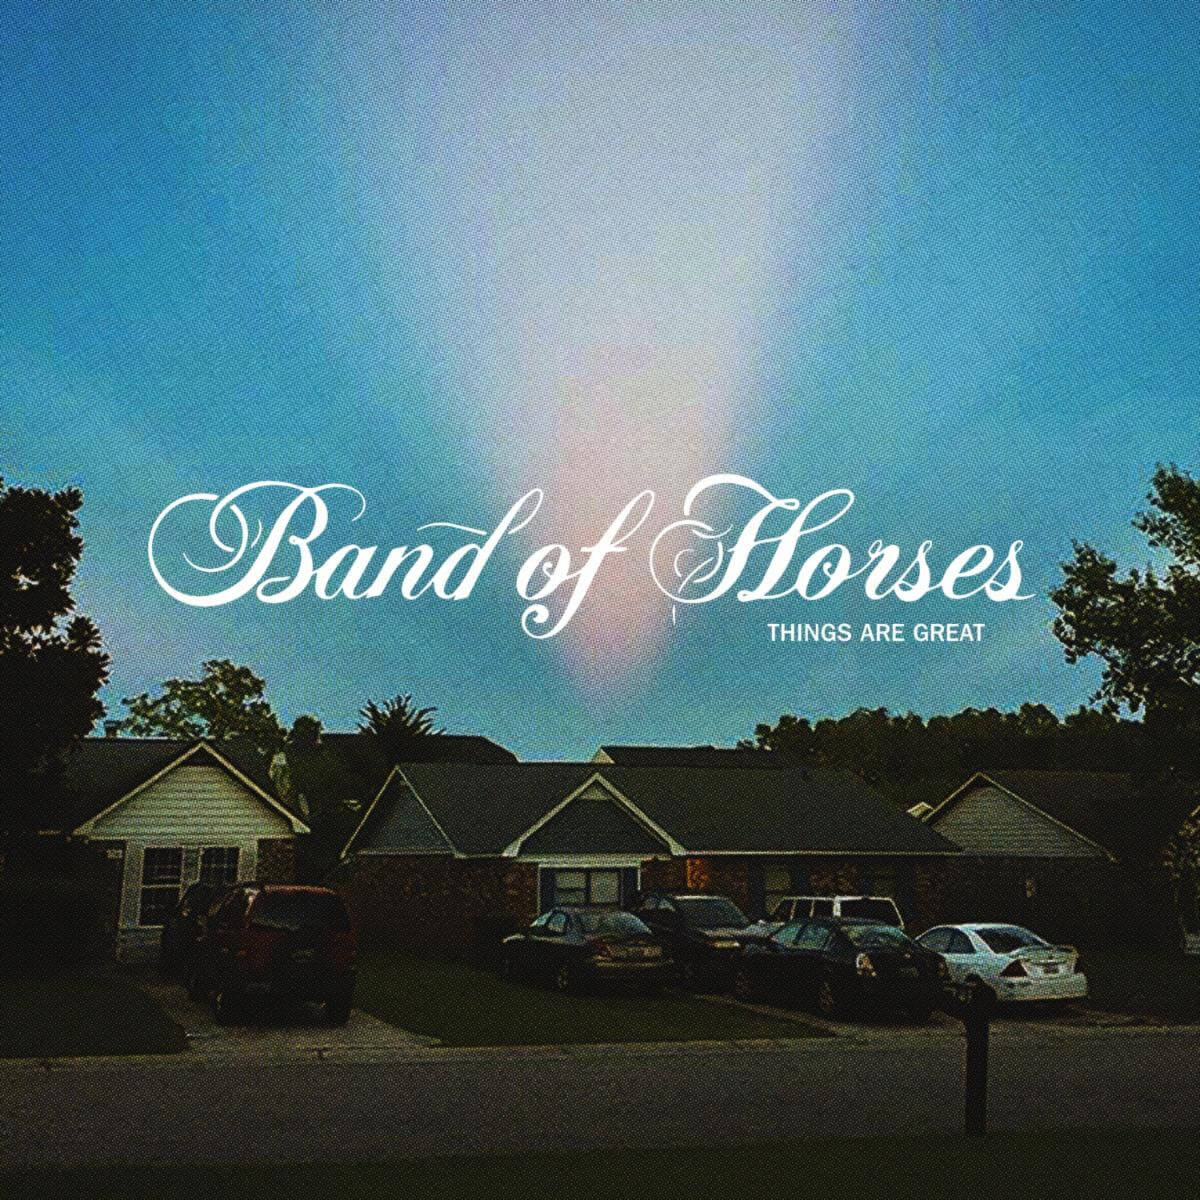 Band of Horses Announces their new album Things Are Great